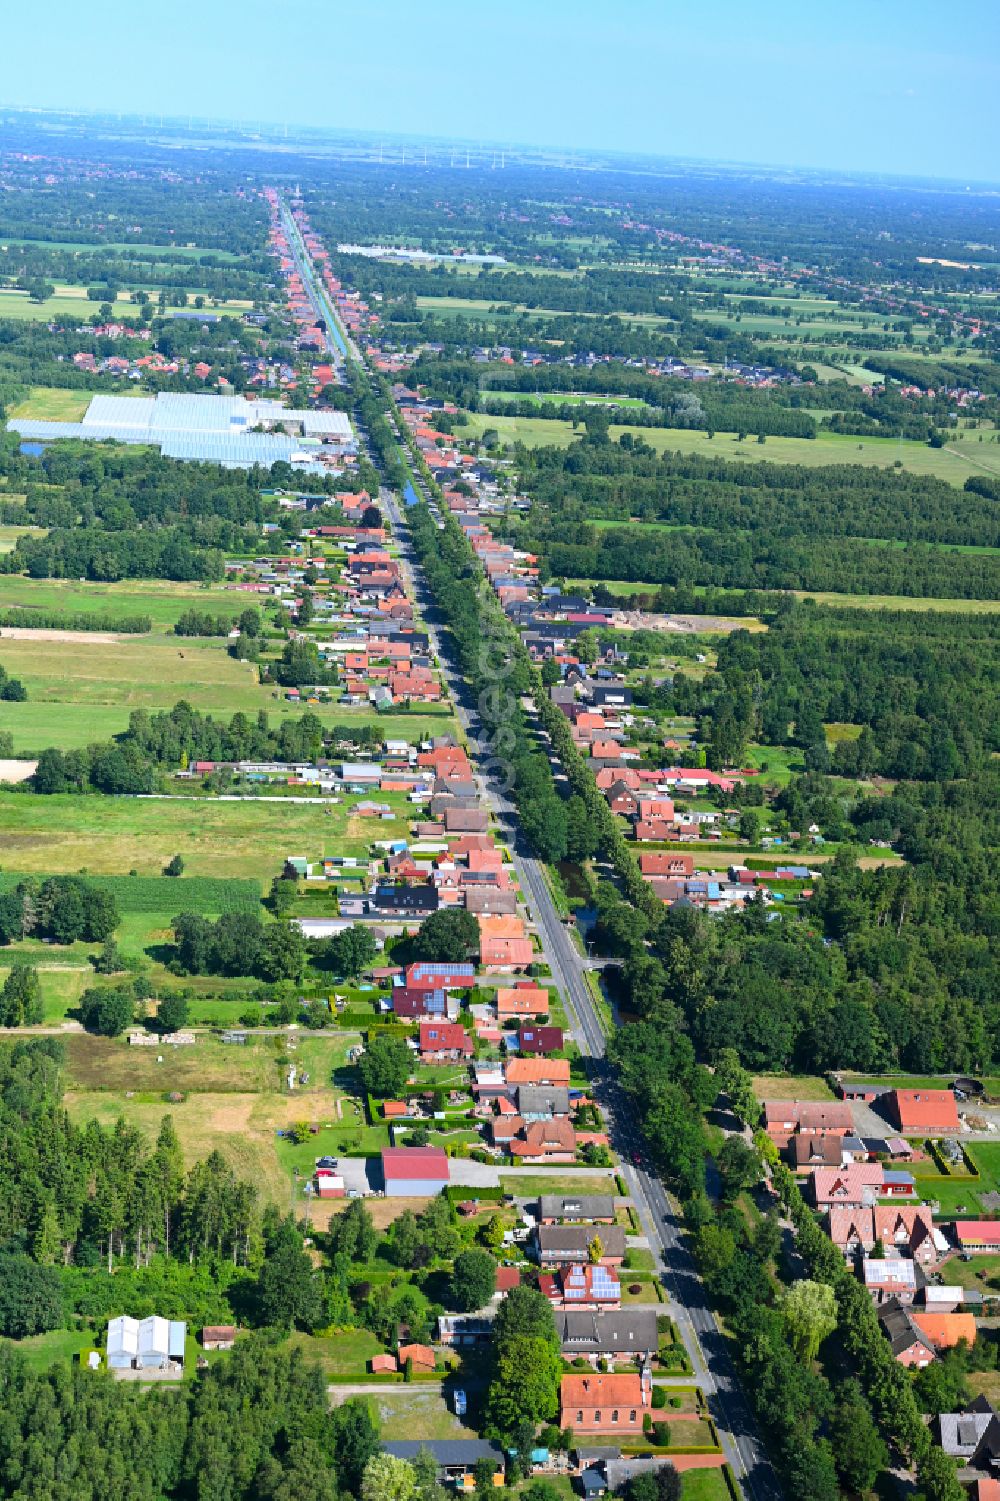 Börgermoor from the bird's eye view: Urban area with outskirts and inner city area on the edge of agricultural fields and arable land in Börgermoor in the state Lower Saxony, Germany